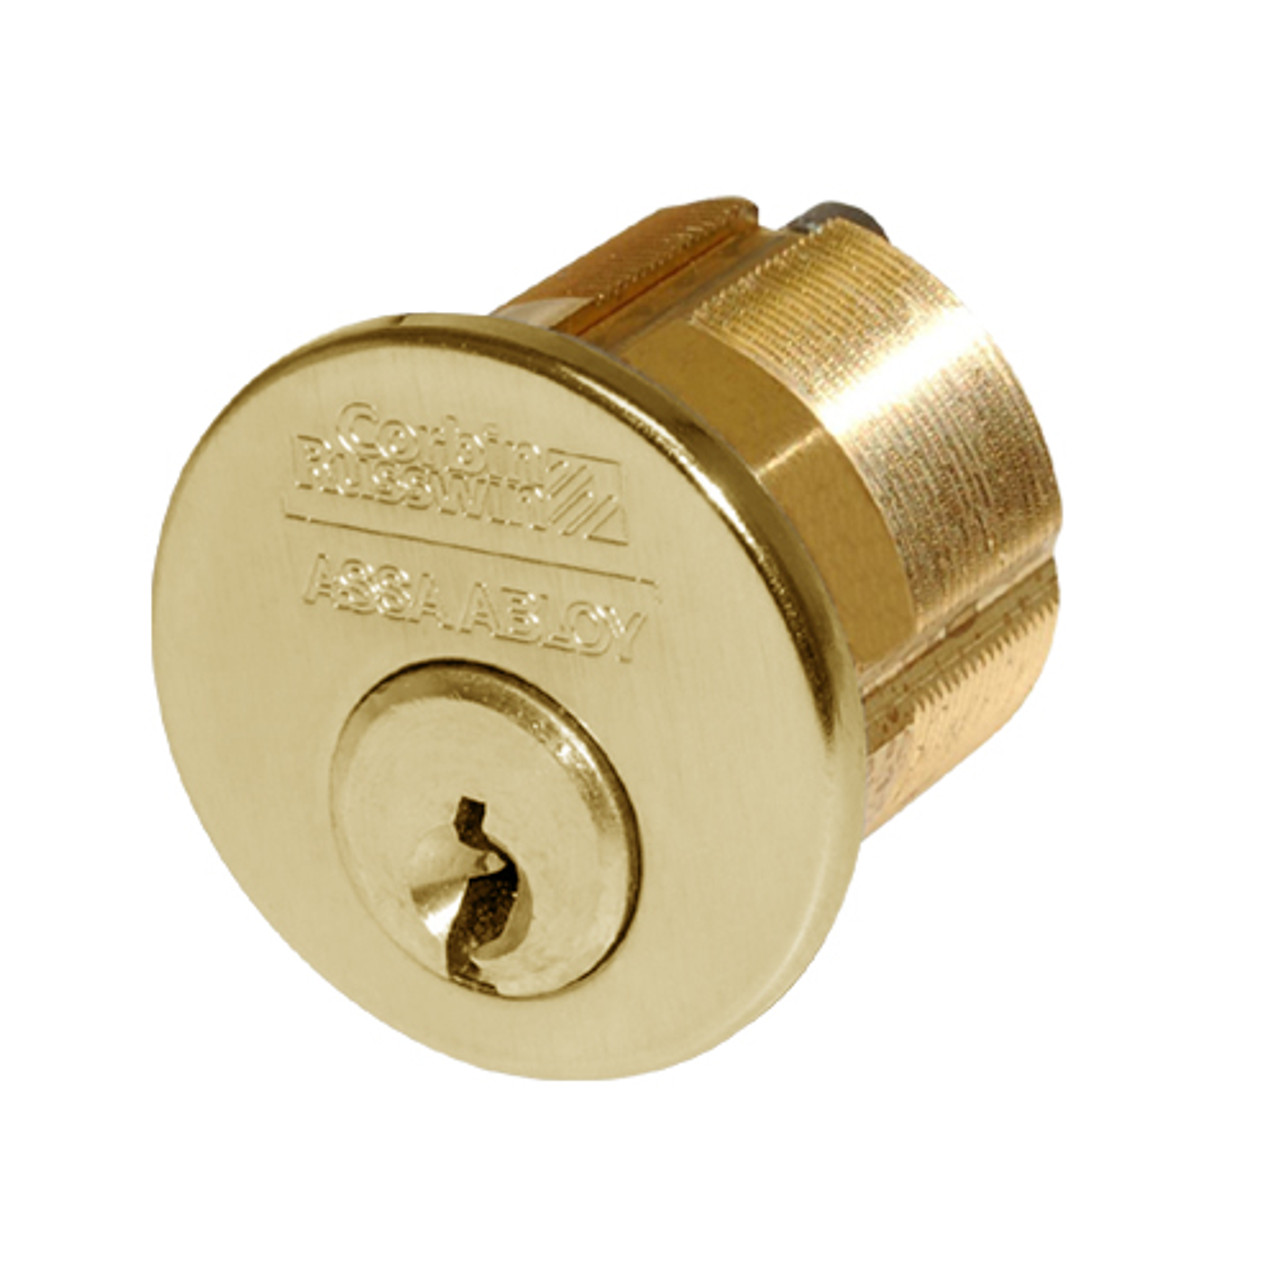 CR1000-114-A06-6-D1-605 Corbin Conventional Mortise Cylinder for Mortise Lock and DL3000 Deadlocks with Schlage L9000 Cam in Bright Brass Finish